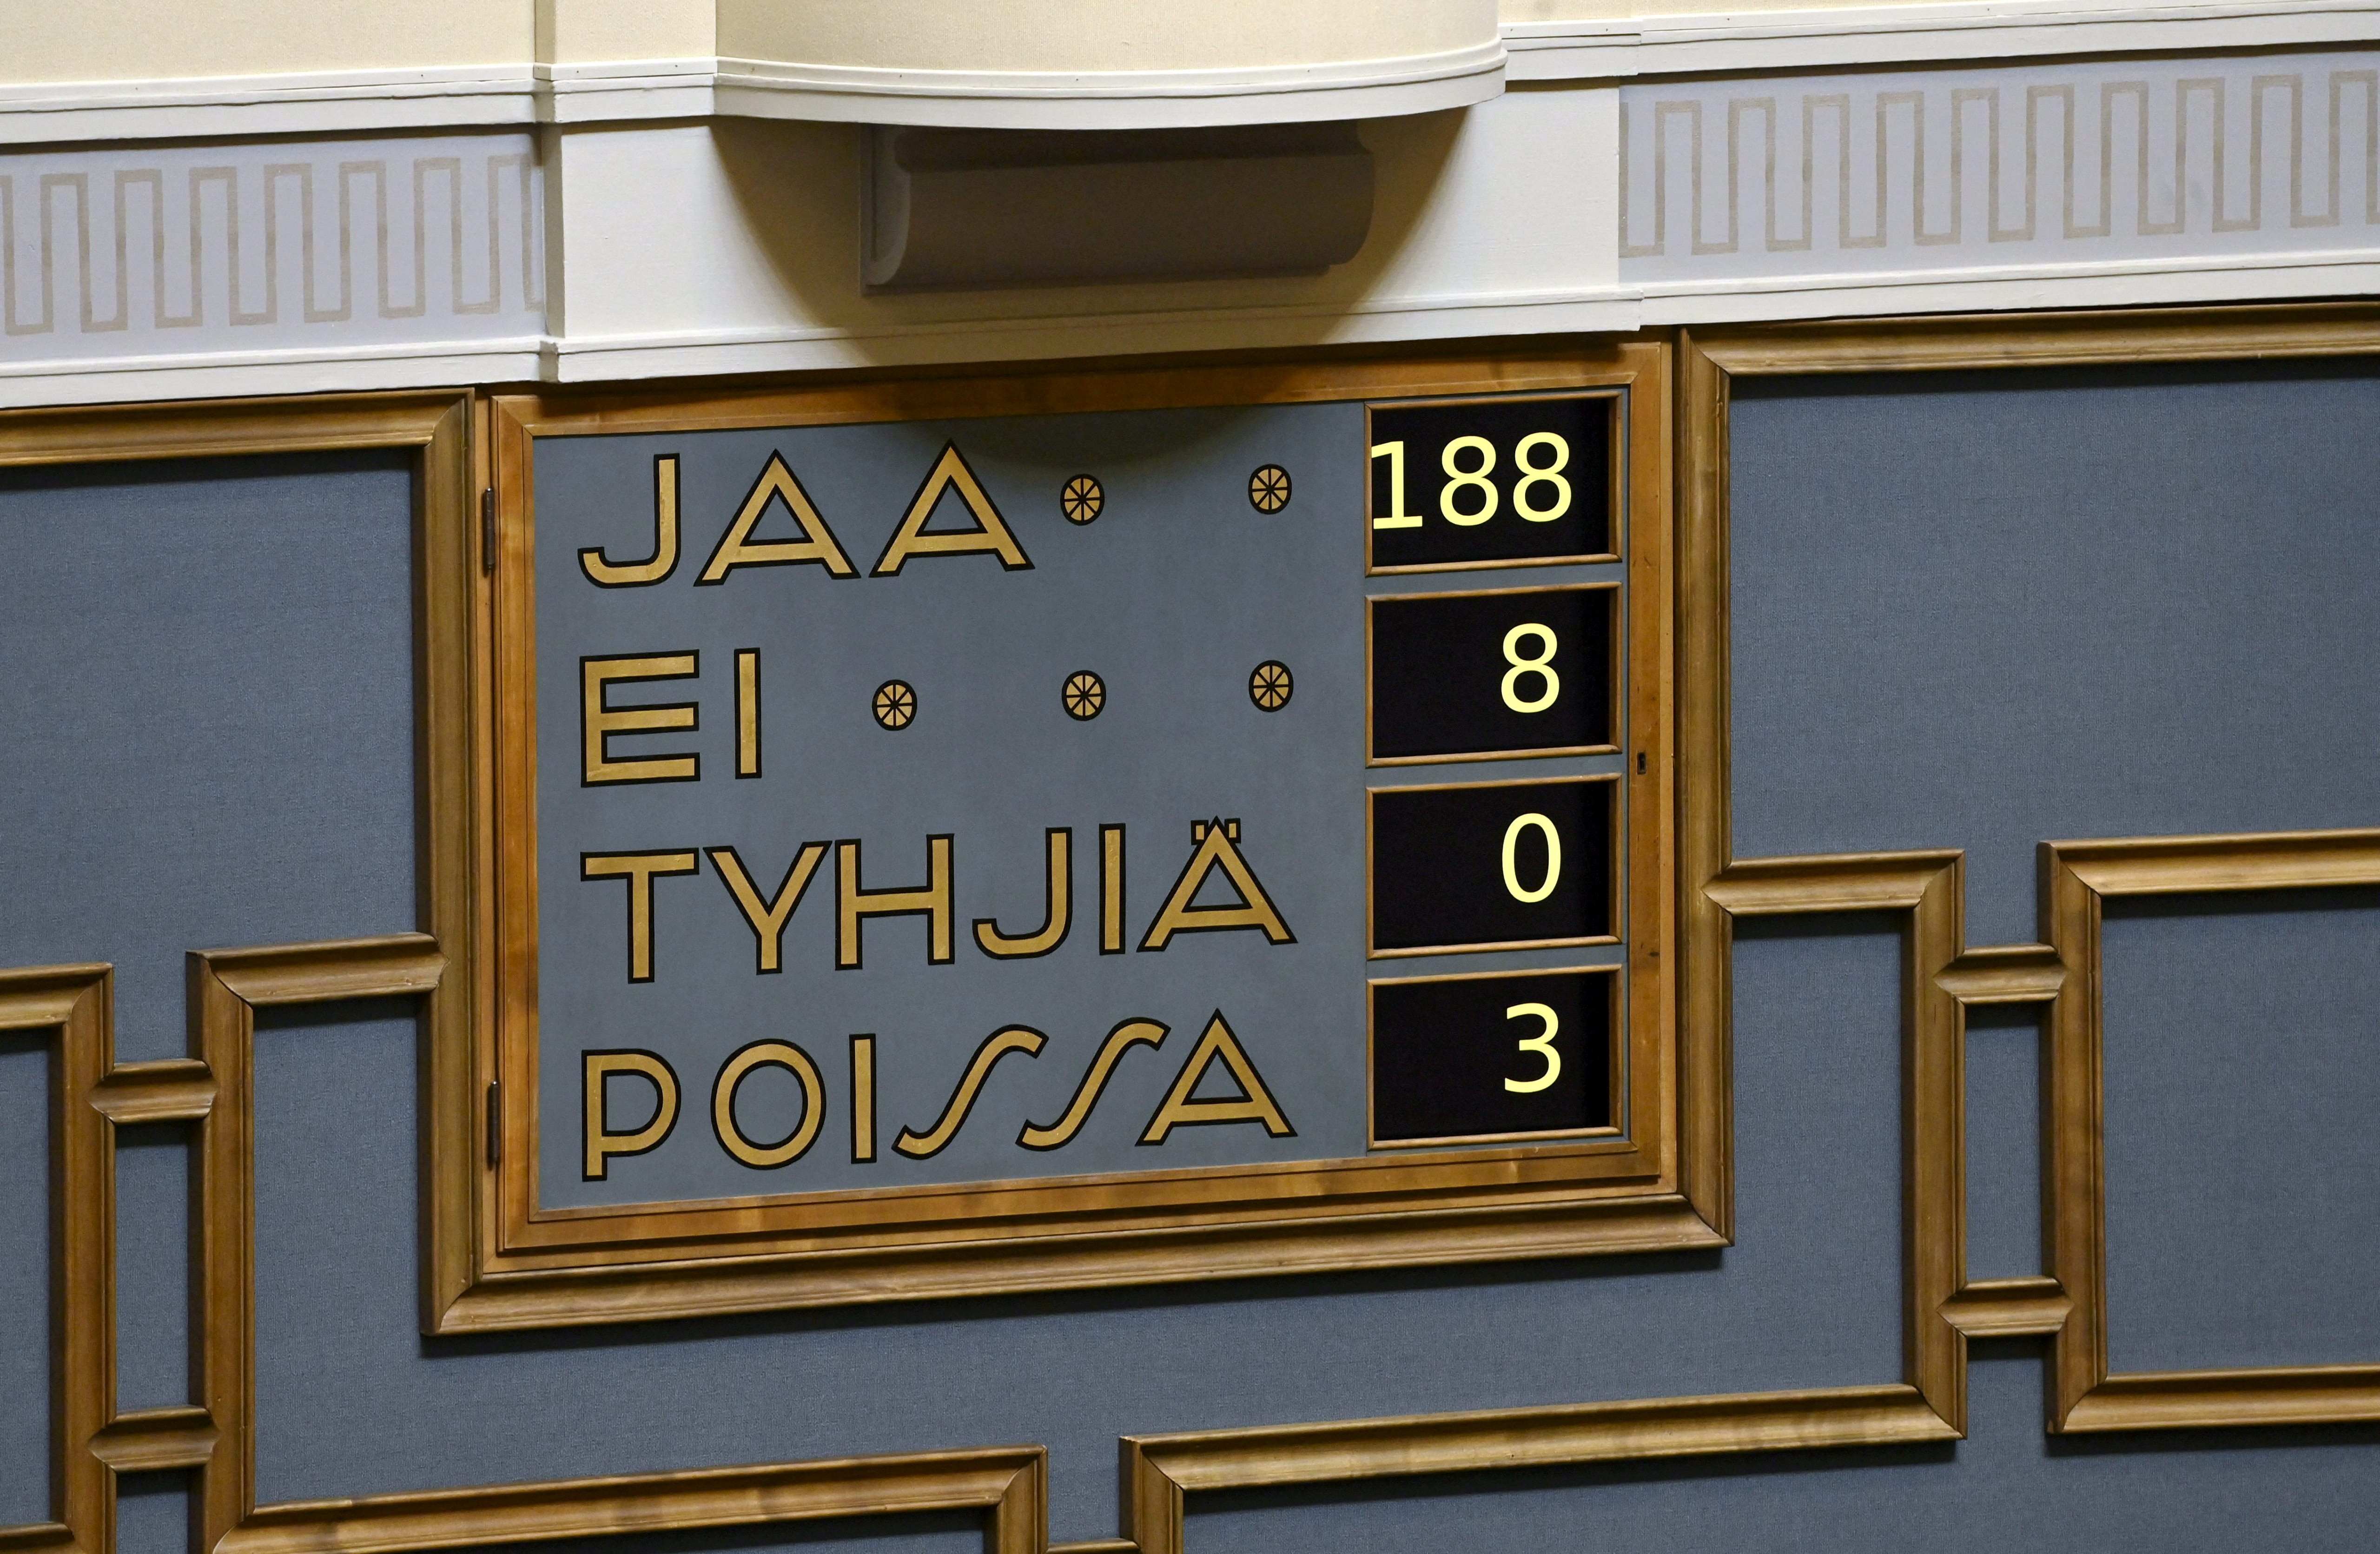 The result of the Nato vote seen on the voting board during the plenary session at the Finnish parliament in Helsinki